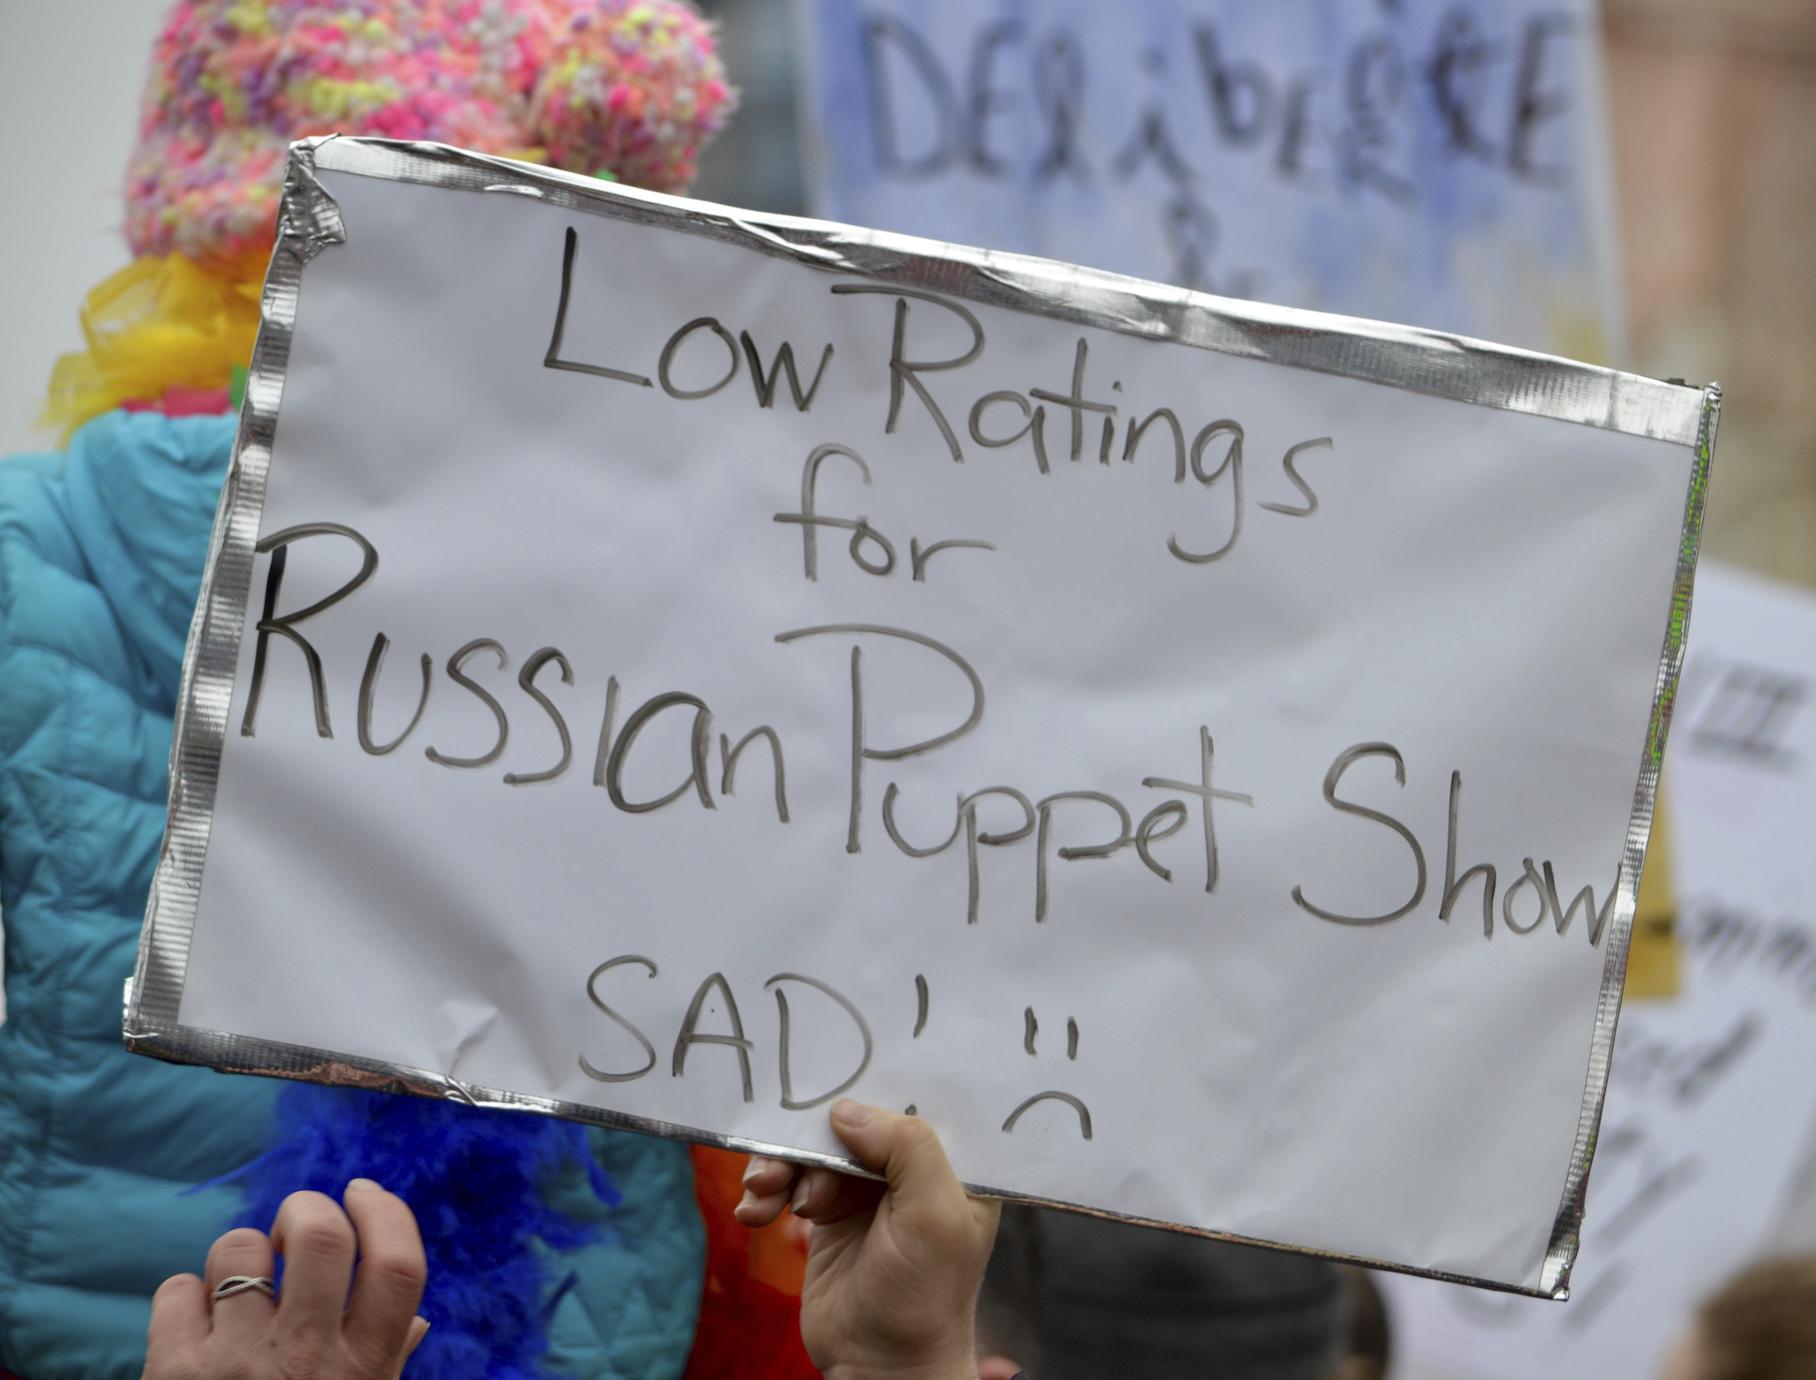 Low Ratings for Russian Puppet Show. Sad!